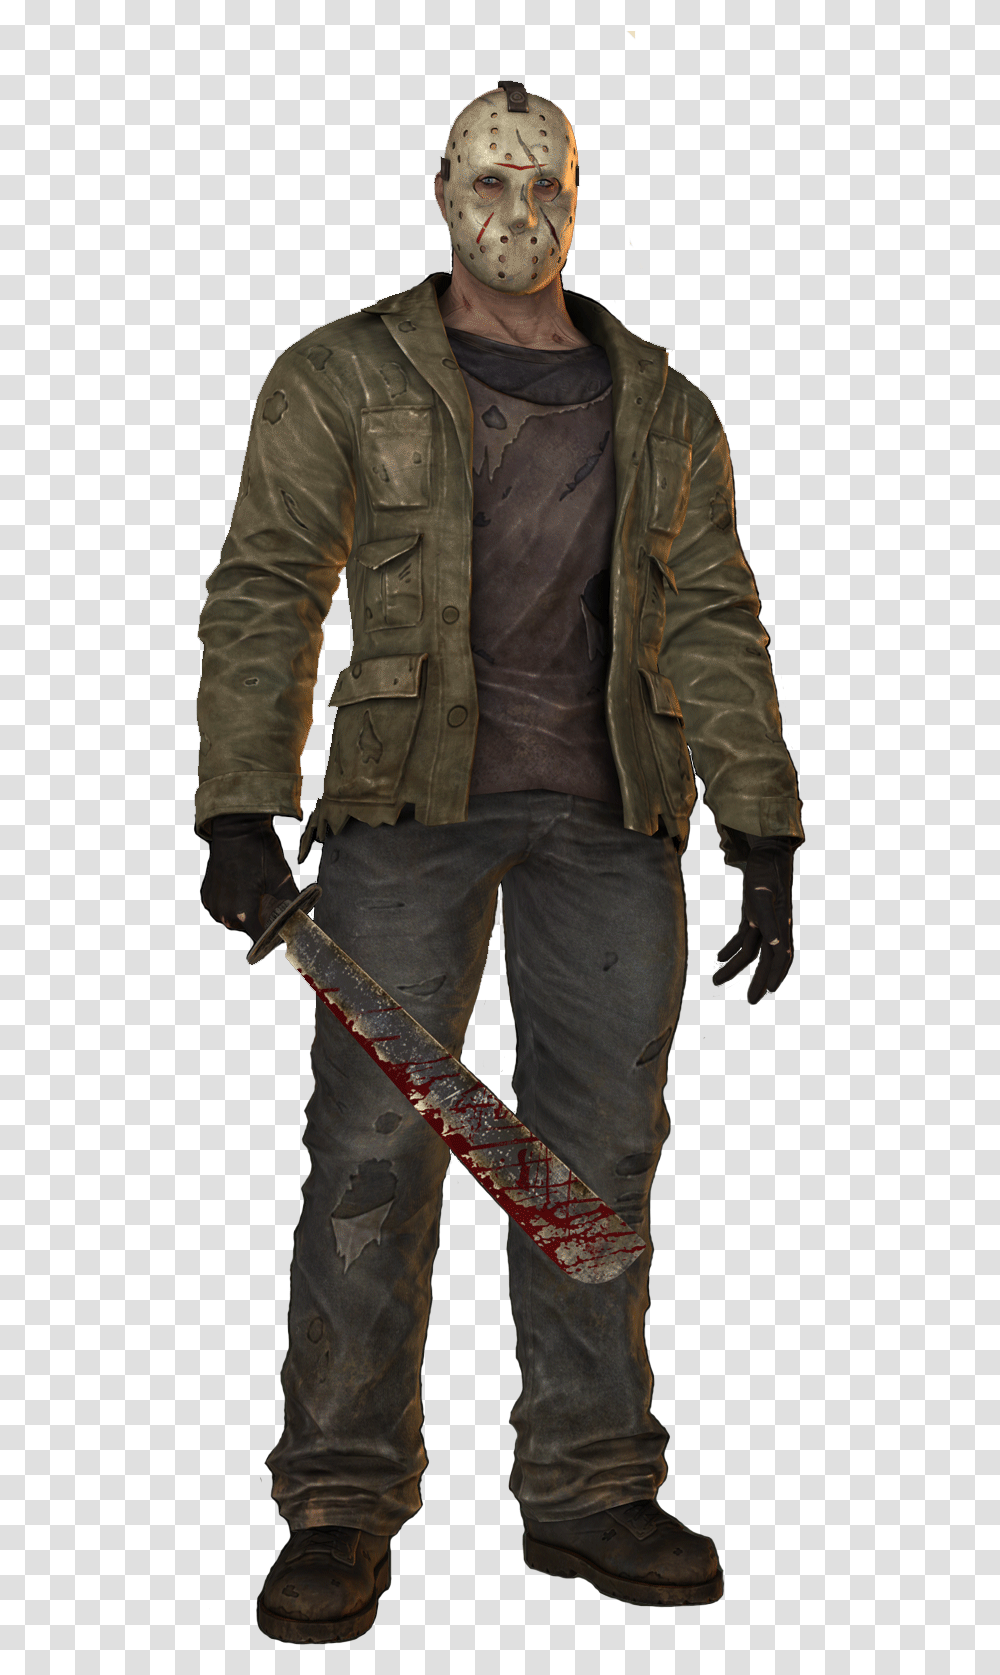 Jason Voorhees Hd Assassins Creed 1 Soldiers, Apparel, Jacket, Coat Transparent Png